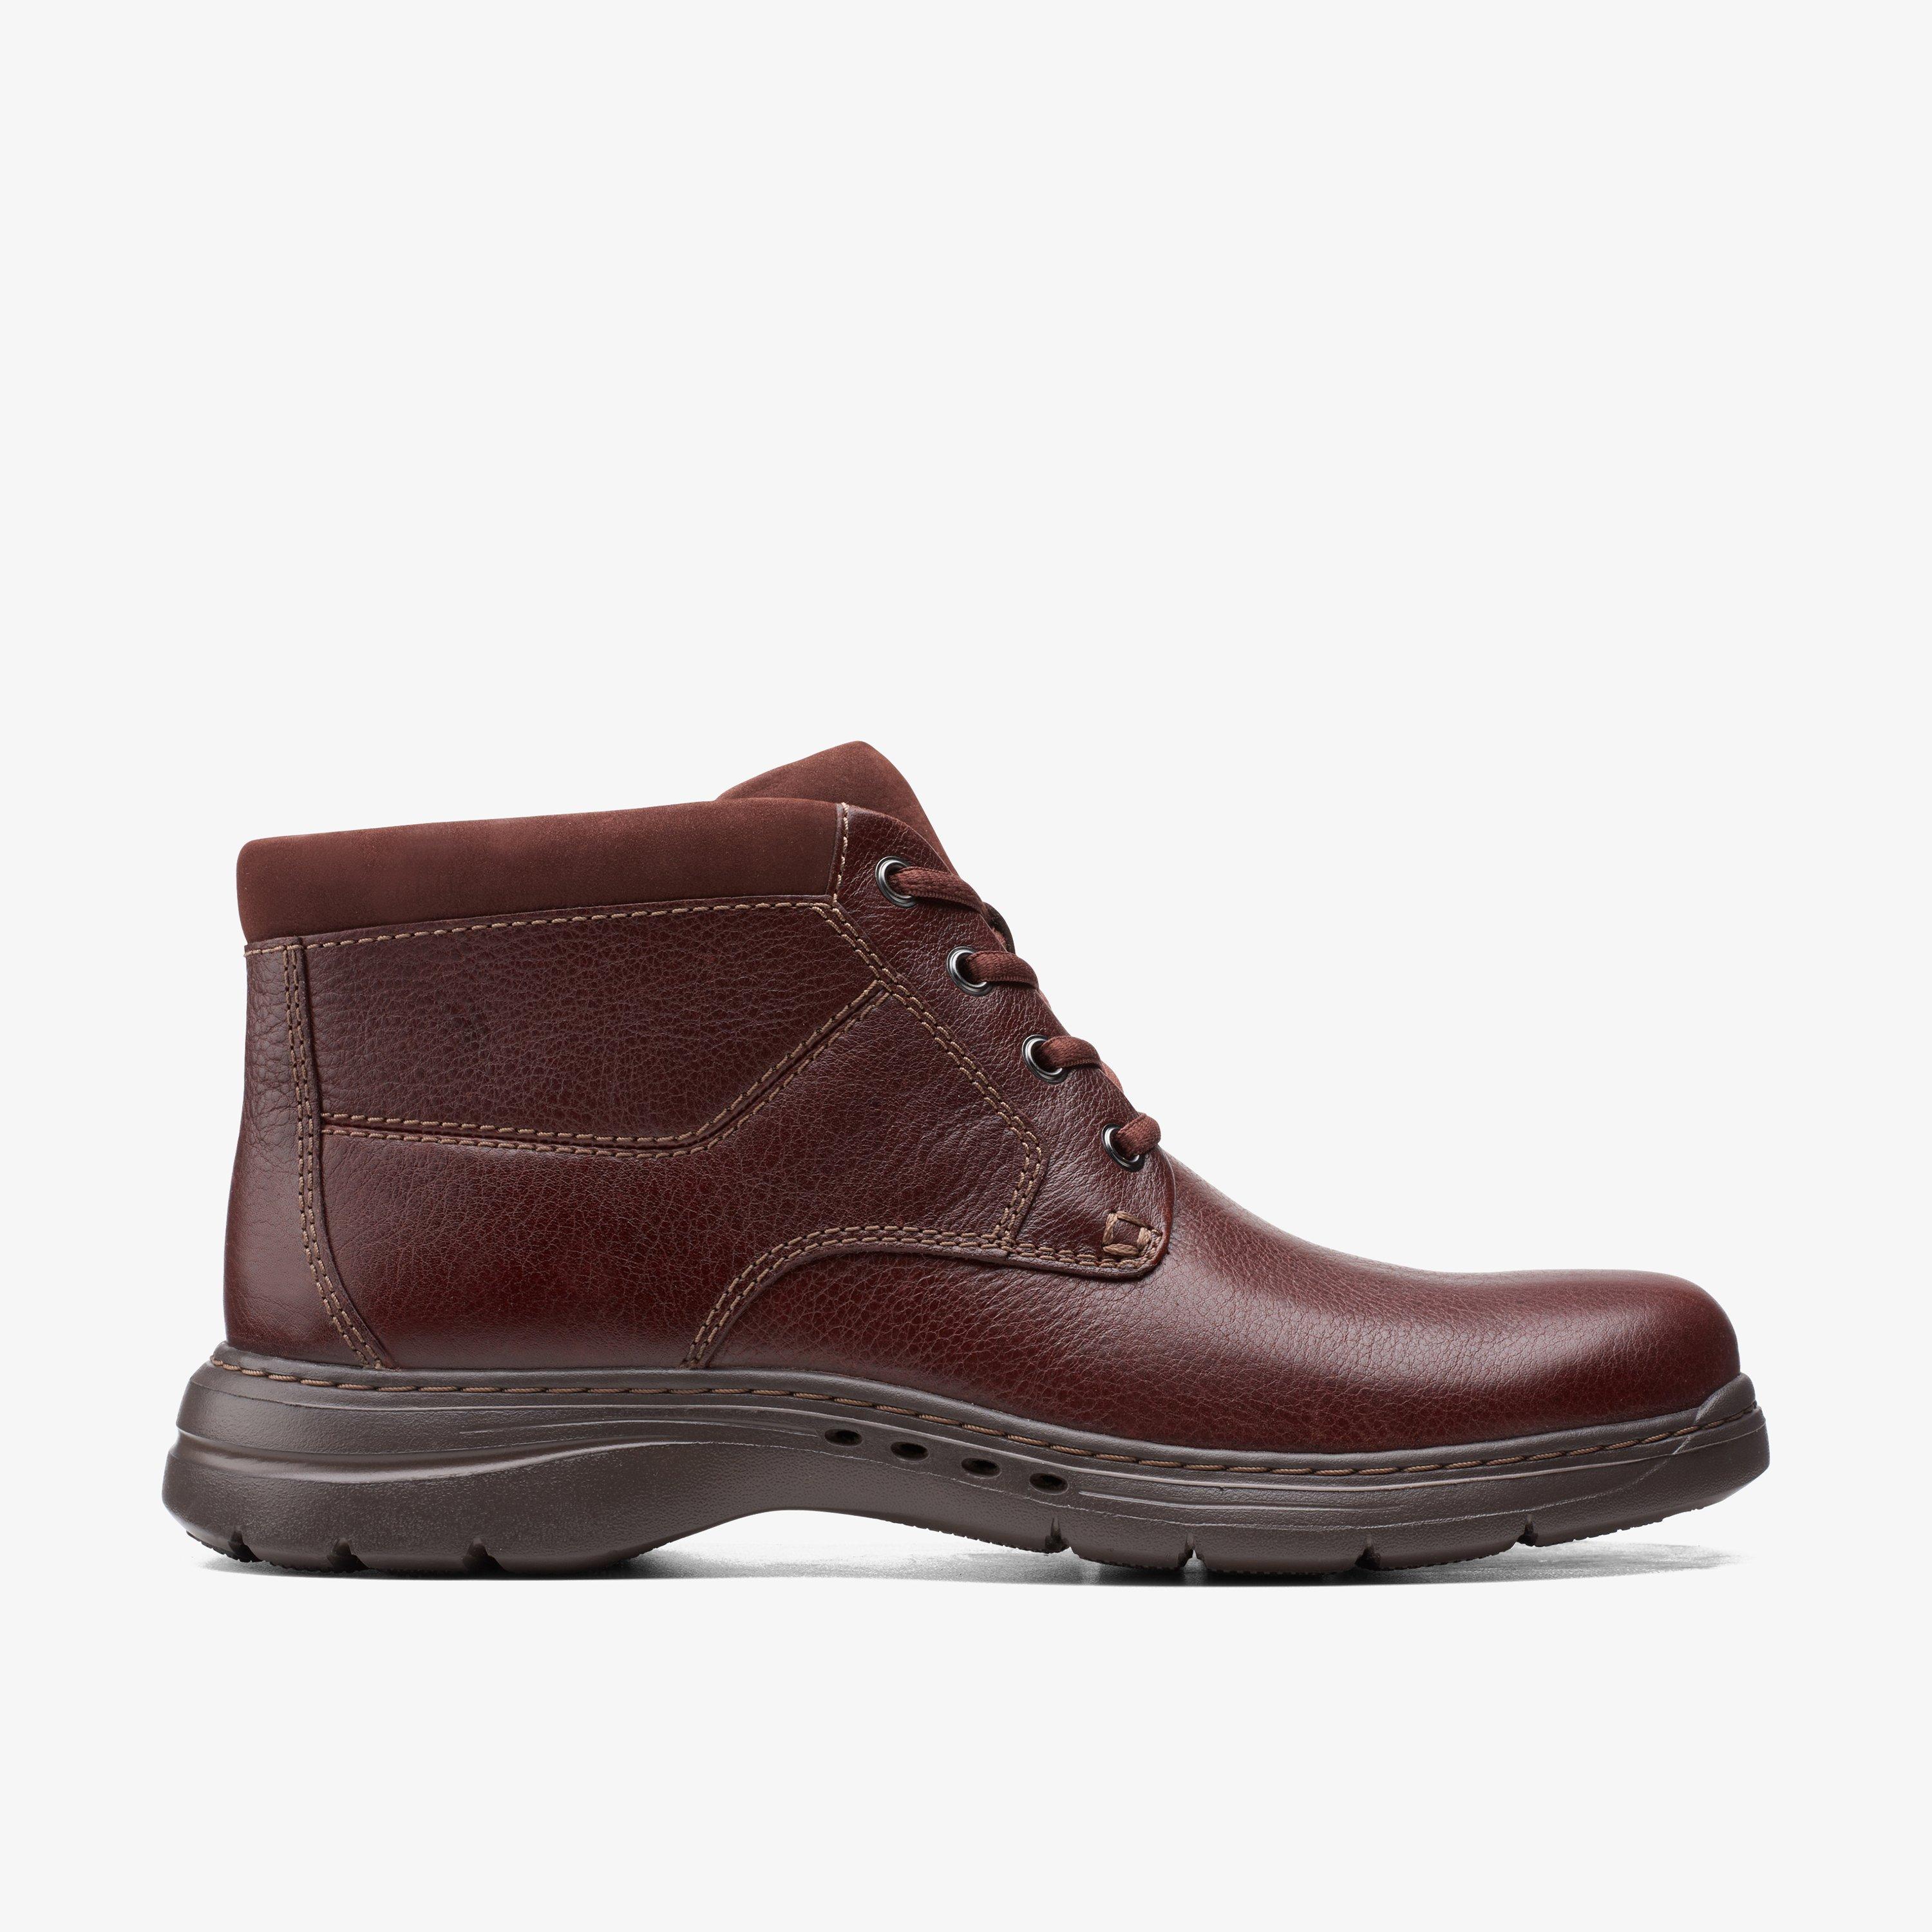 Mens Un Brawley Up Mahogany Leather Boots | Clarks Outlet